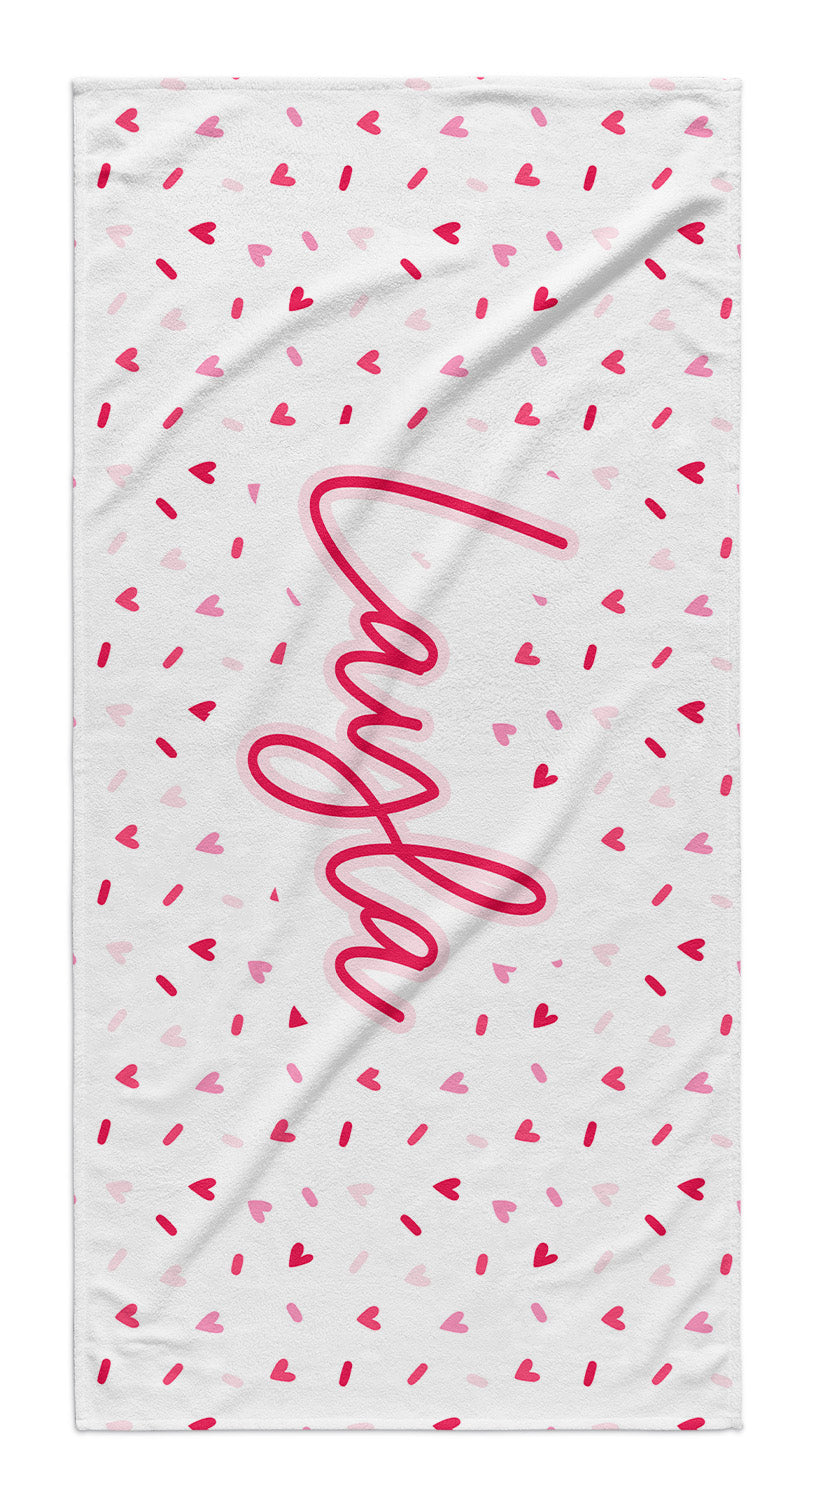 SPRINKLE HEARTS PERSONALIZED TOWEL